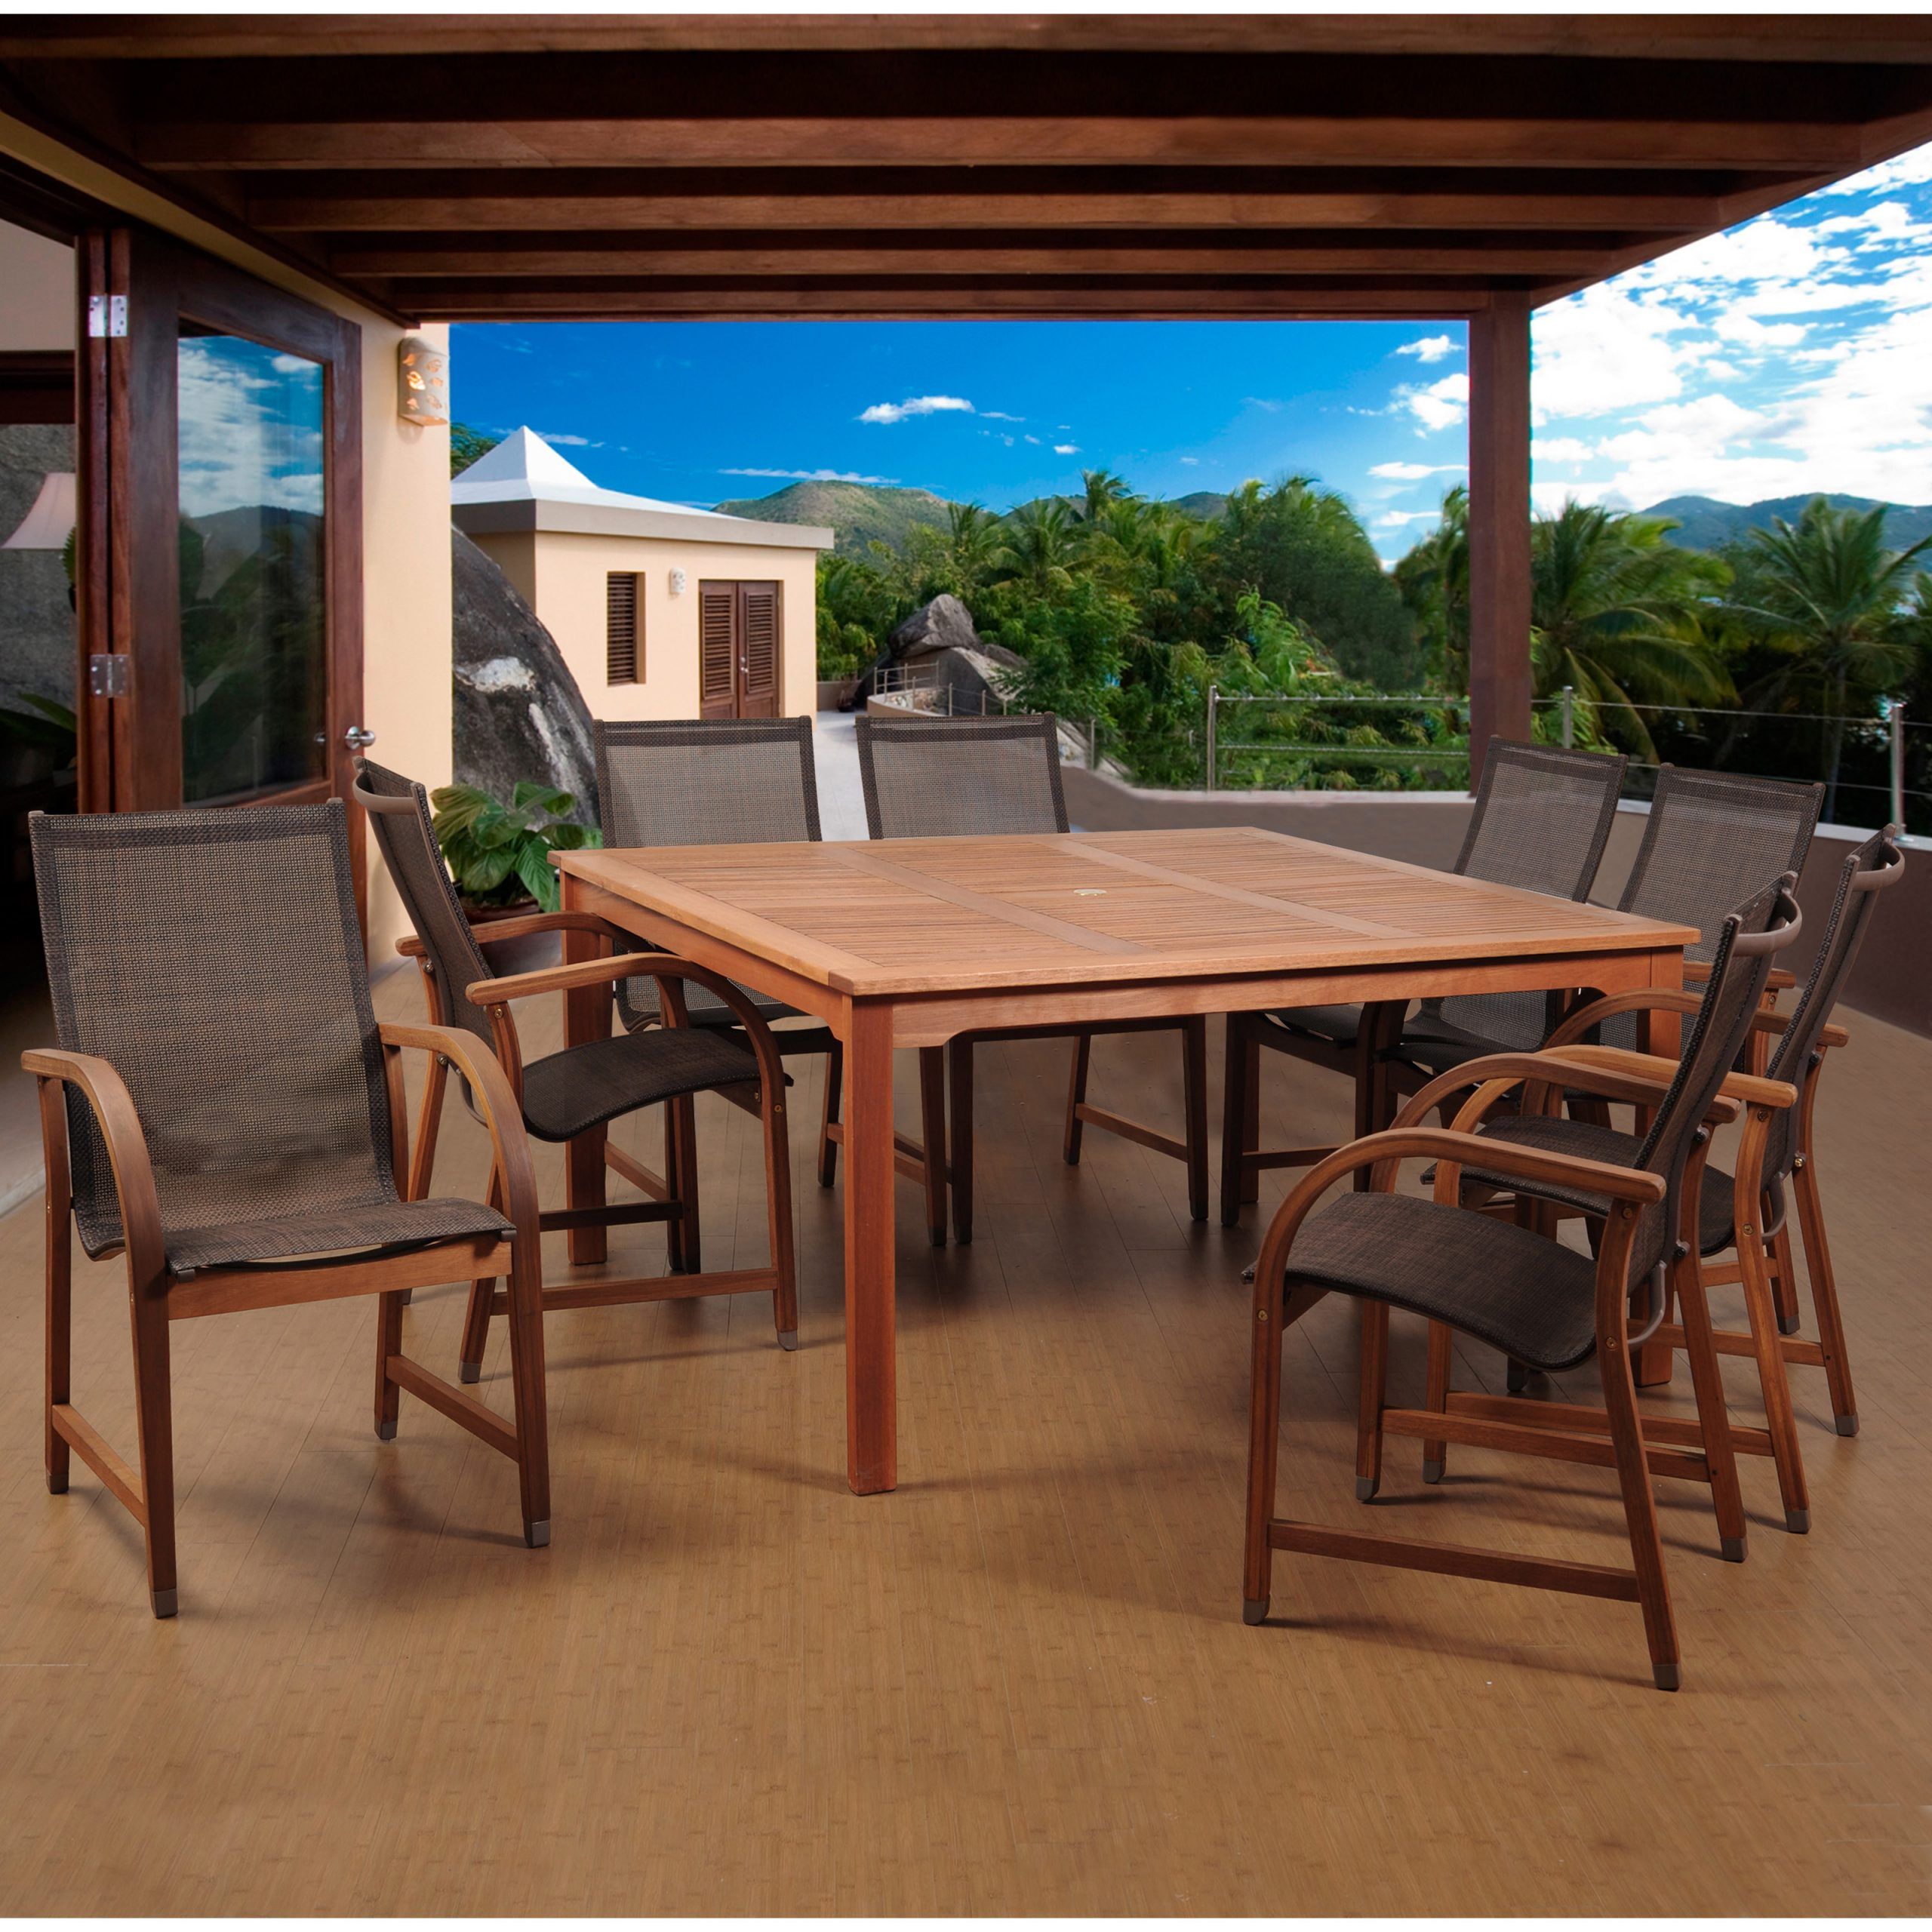 Amazonia Indiana 9 Piece Square Dining Set With Sling Chairs – Patio In Well Known Square 9 Piece Outdoor Dining Sets (View 12 of 15)